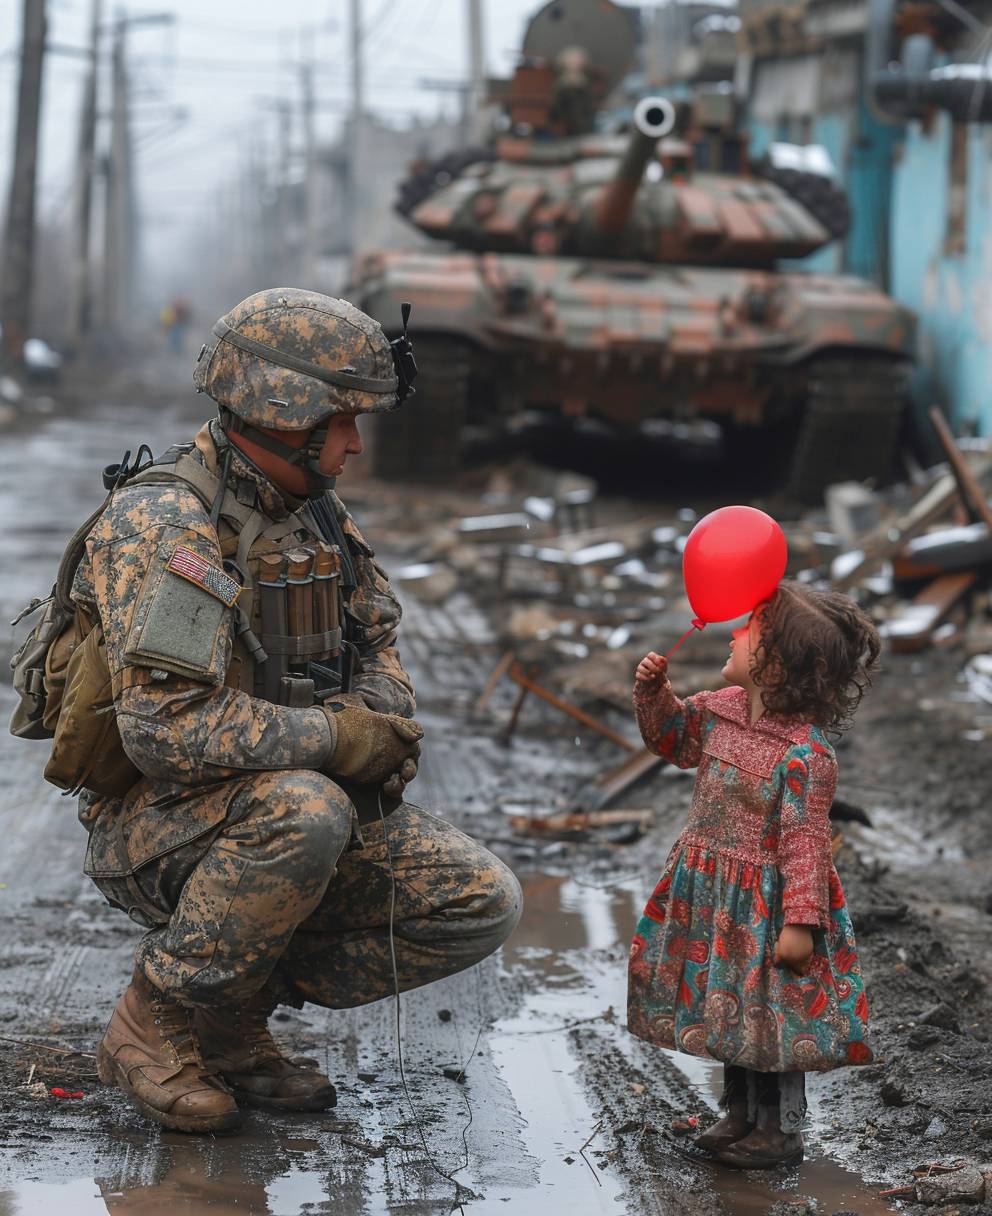 A British soldier on his knee gifting a red balloon to a small girl, in the background there is a destroyed city in Ukraine. A Ukrainian flag hangs in tatters of the side of a building. A warzone including an abandoned tank